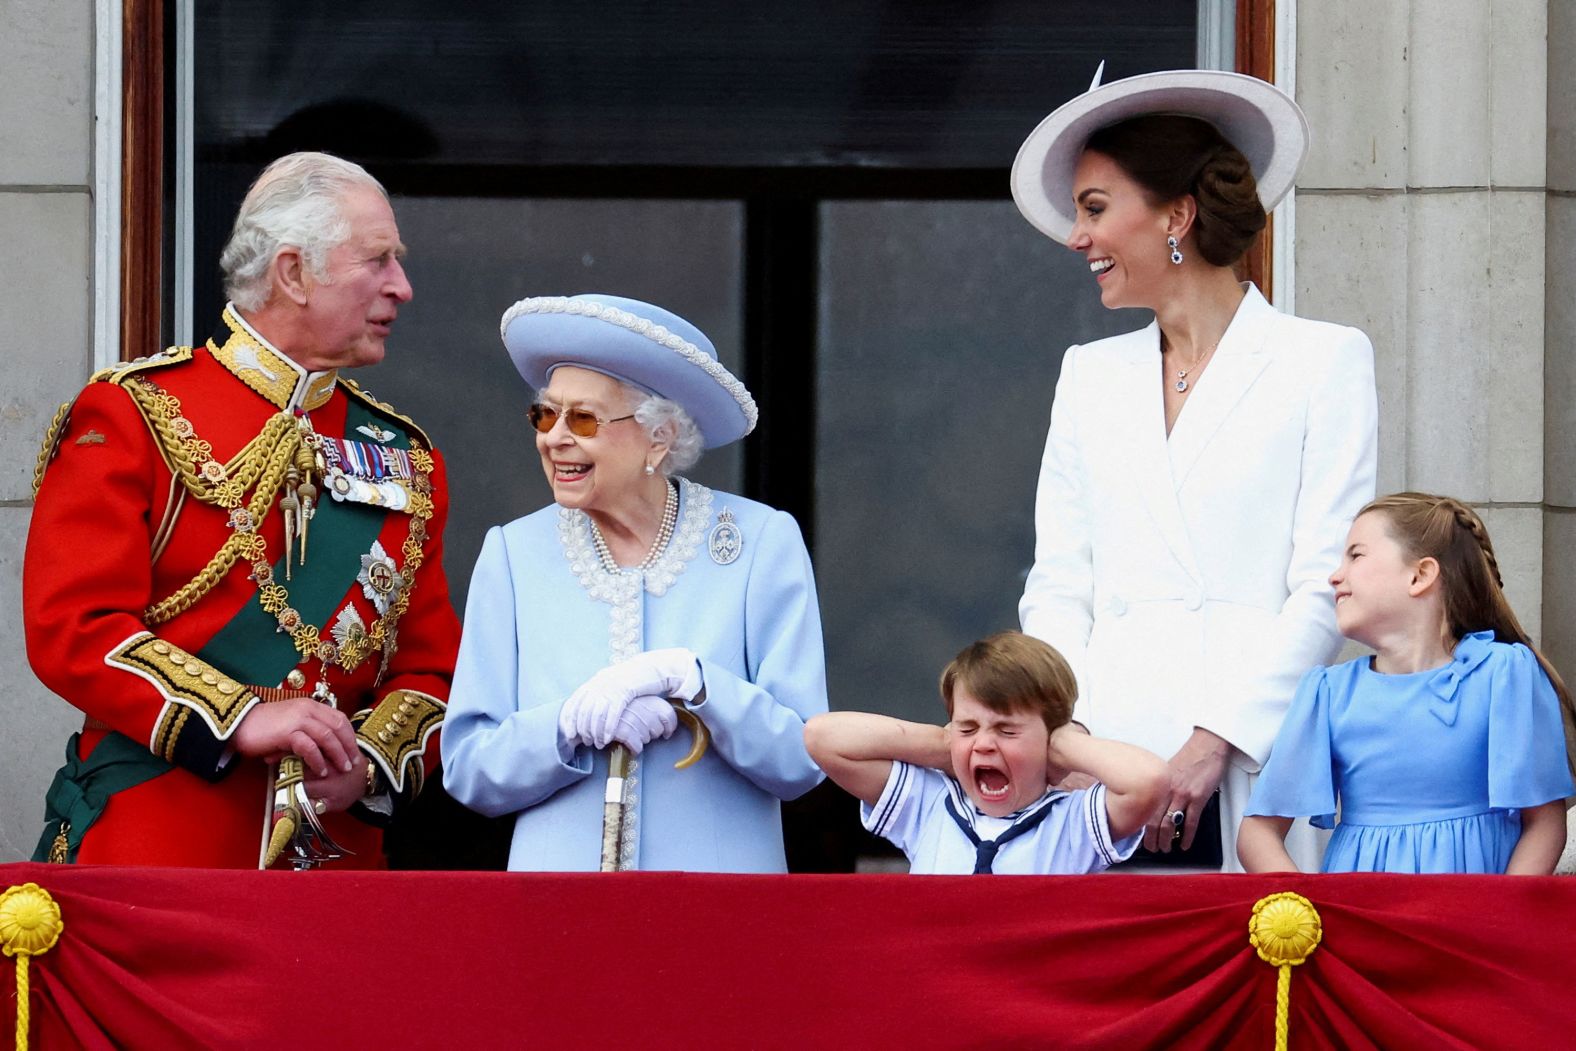 Prince Louis holds his hands over his ears during the six-minute flypast staged by the Royal Air Force during the Queen's Platinum Jubilee celebrations in 2022. From left are Prince Charles, the Queen, Prince Louis, Kate and Princess Charlotte.